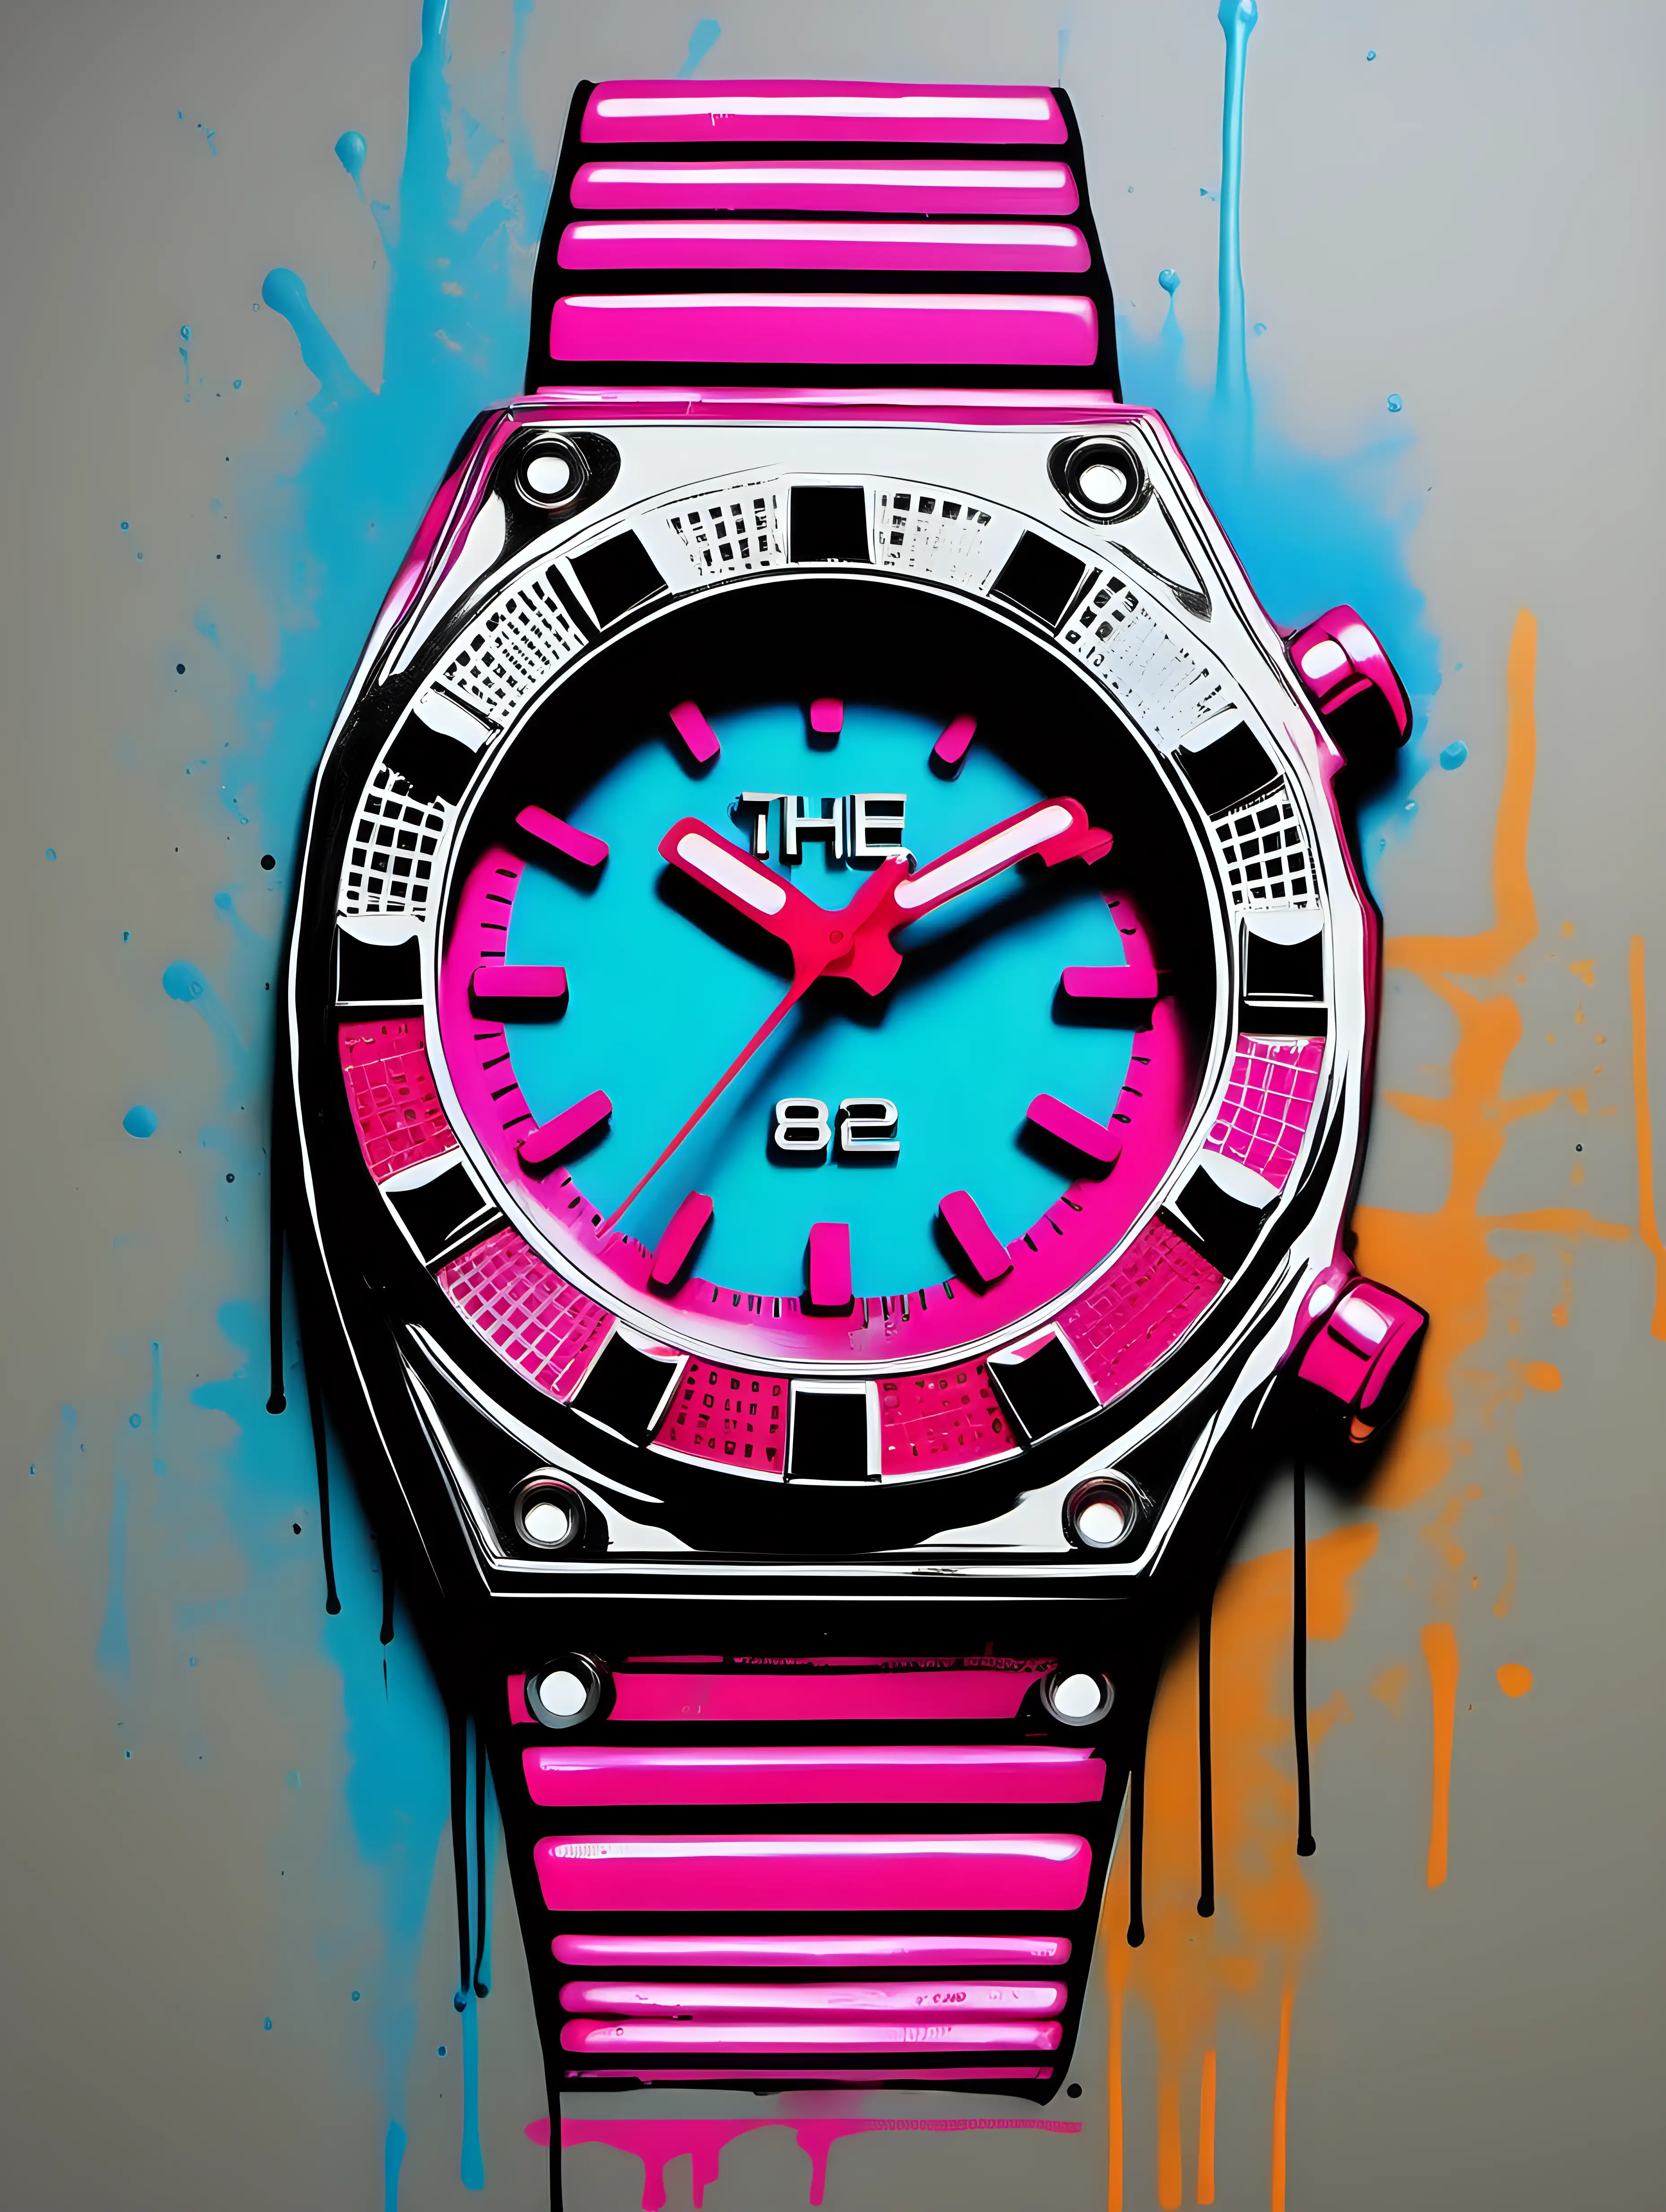 Create a highly detailed spray paint artwork featuring a classic digital watch from the 1980s. The watch should be central in the composition and exhibit characteristics typical of 1980s technology and style. It should have a rectangular face with a clear digital display, showing time in a typical LCD font. The watchband should be of a solid, retro color like neon or pastel, characteristic of the era. The background should capture the essence of the 80s, perhaps including elements like bright, bold geometric patterns, or iconic 80s symbols. The overall art should have a vibrant, energetic feel, reflecting the fashion and tech trends of the 1980s, with an emphasis on the unique textures and layers. Show the achieved through spray paint. Show the time as 4:20am